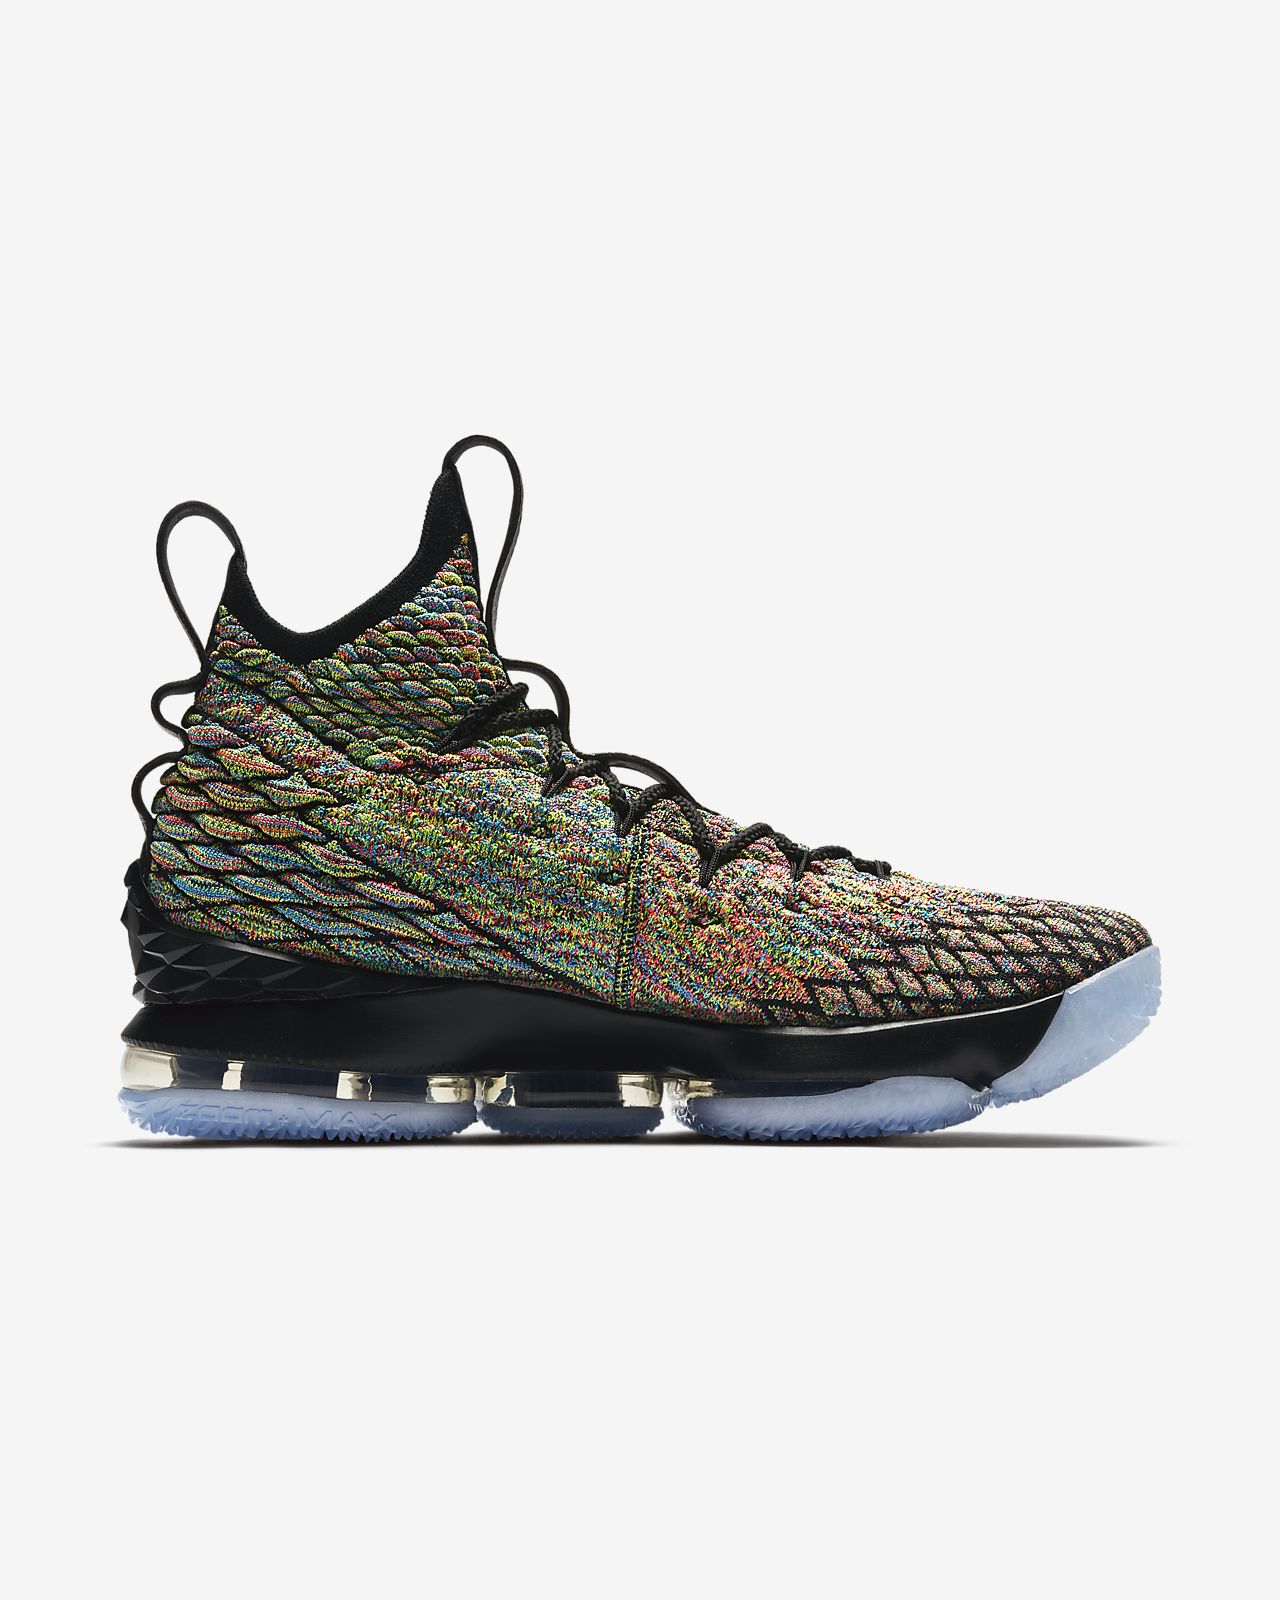 lebron 15s for kids